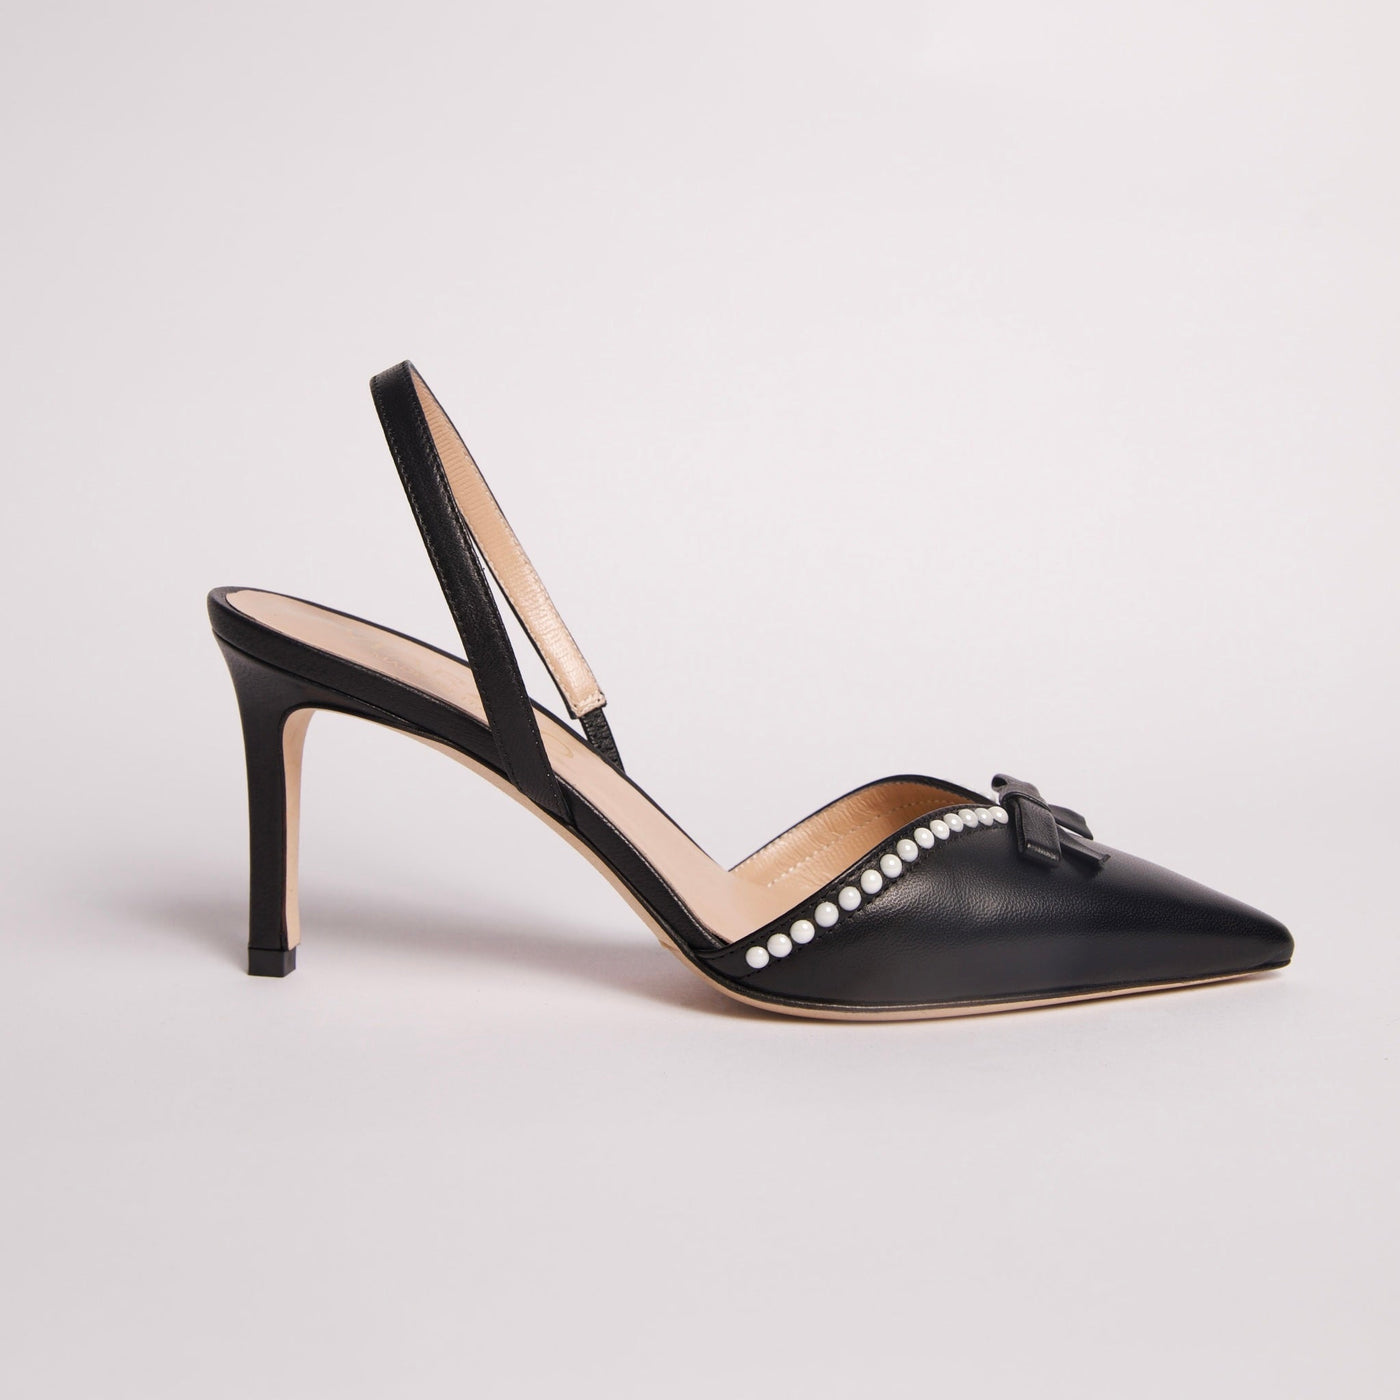 Black slingback pump with beading details.